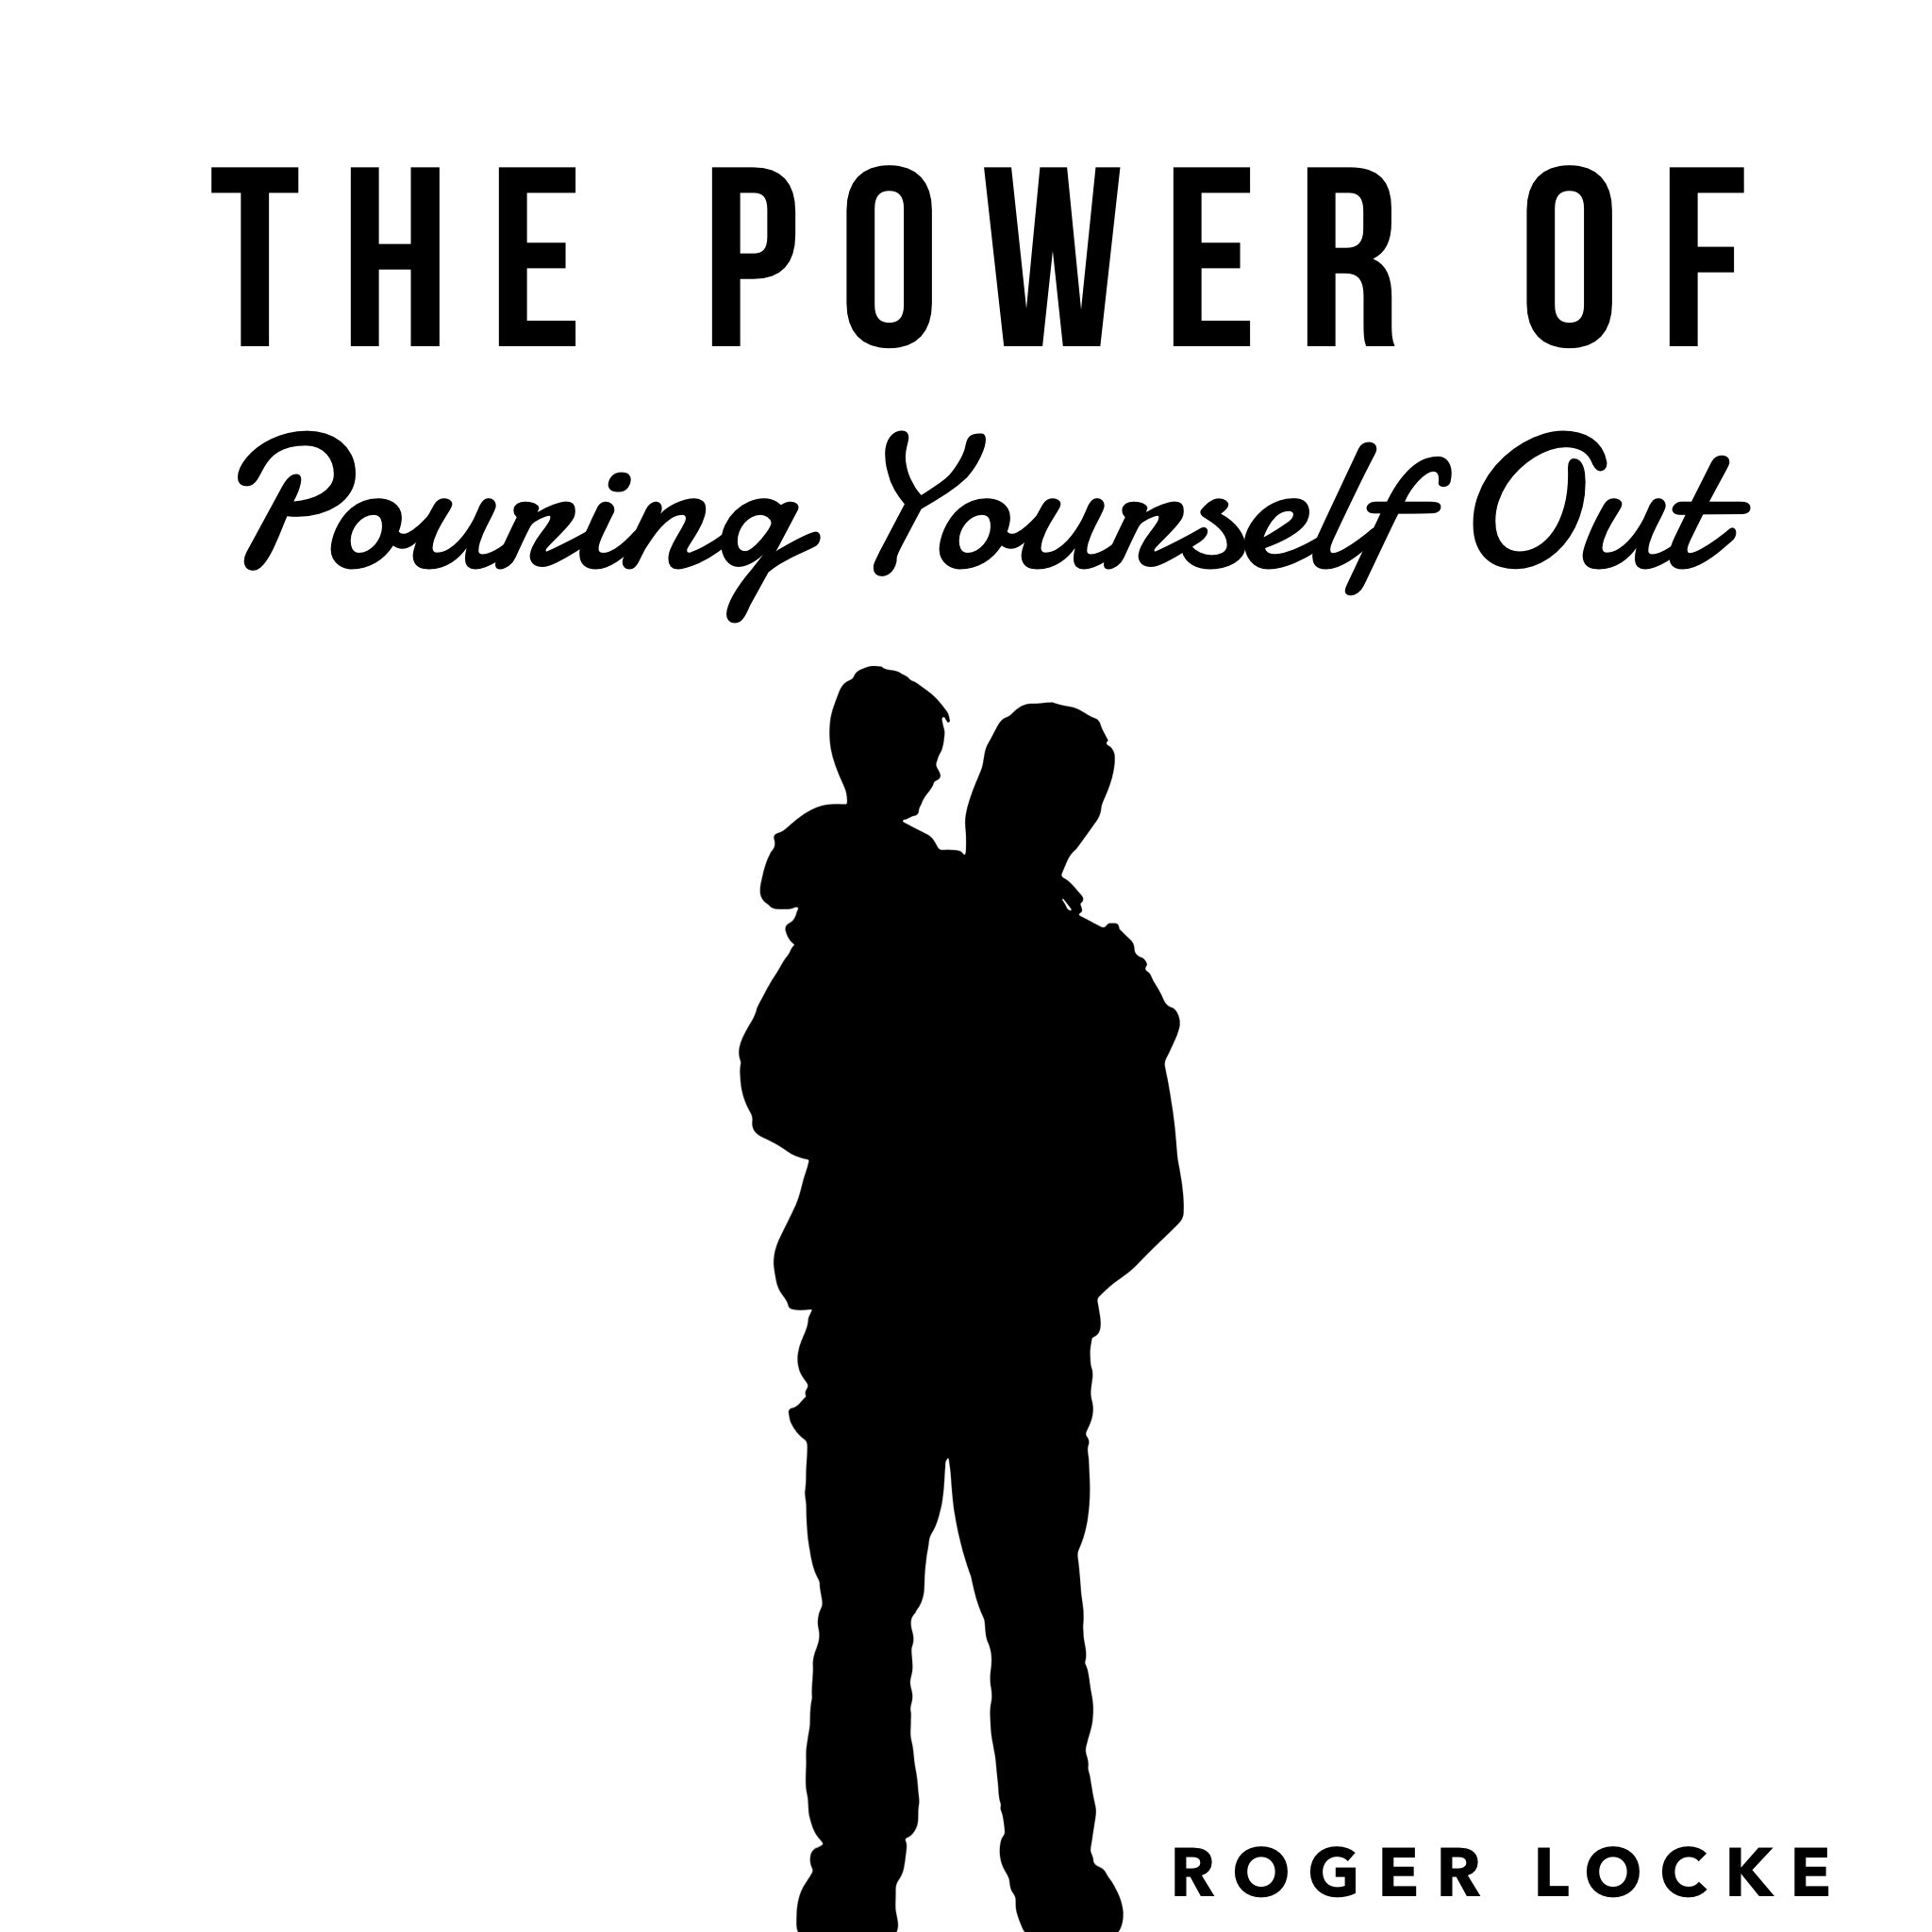 The Power of Pouring Yourself Out